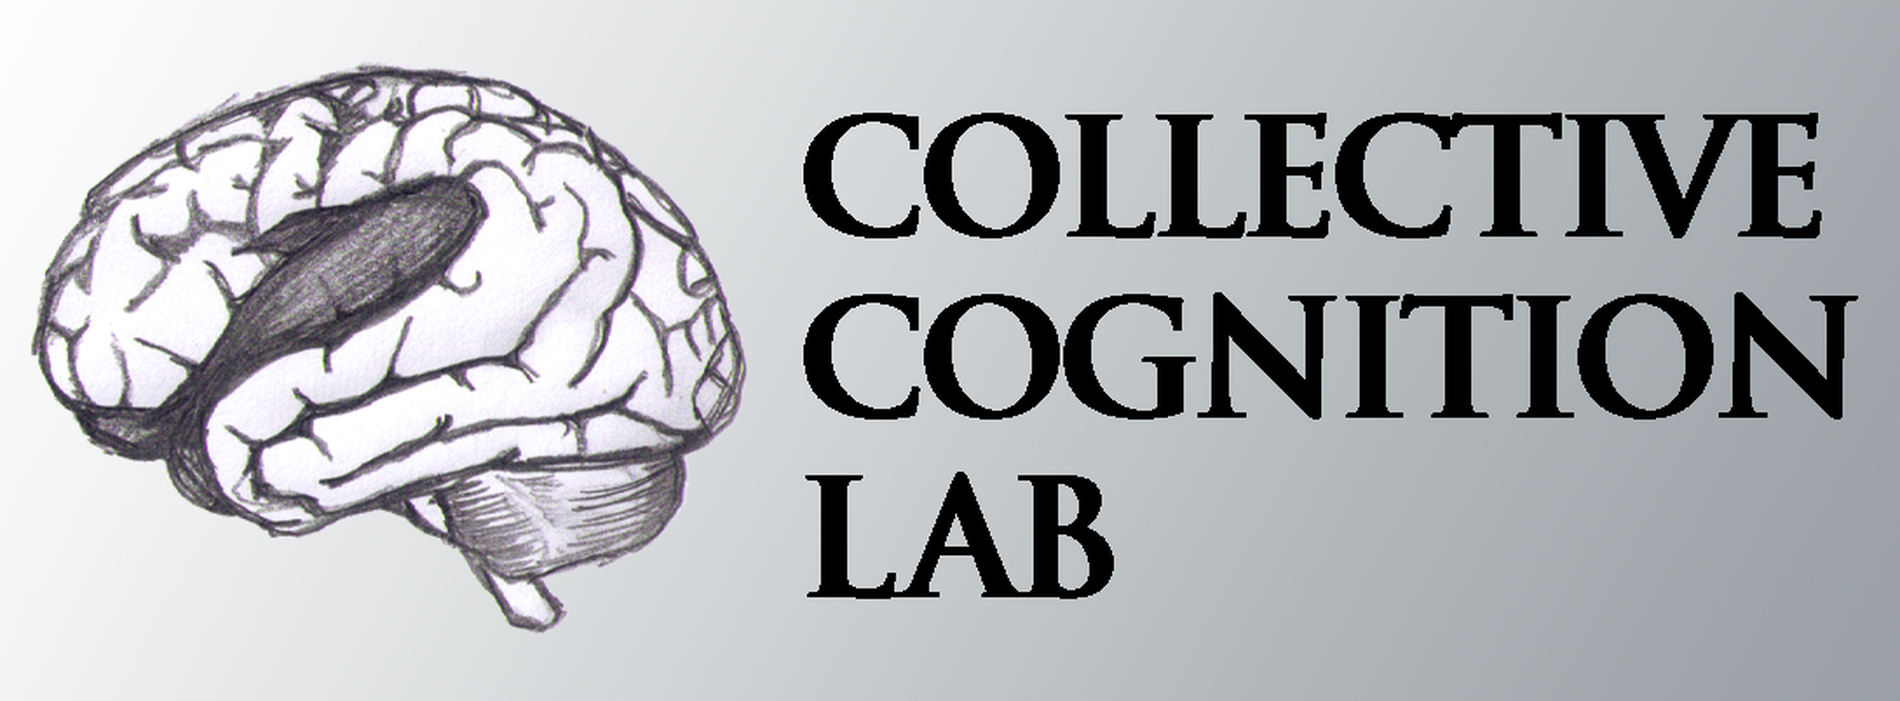 Collective Cognition Lab (logo by Sarah Wahba)